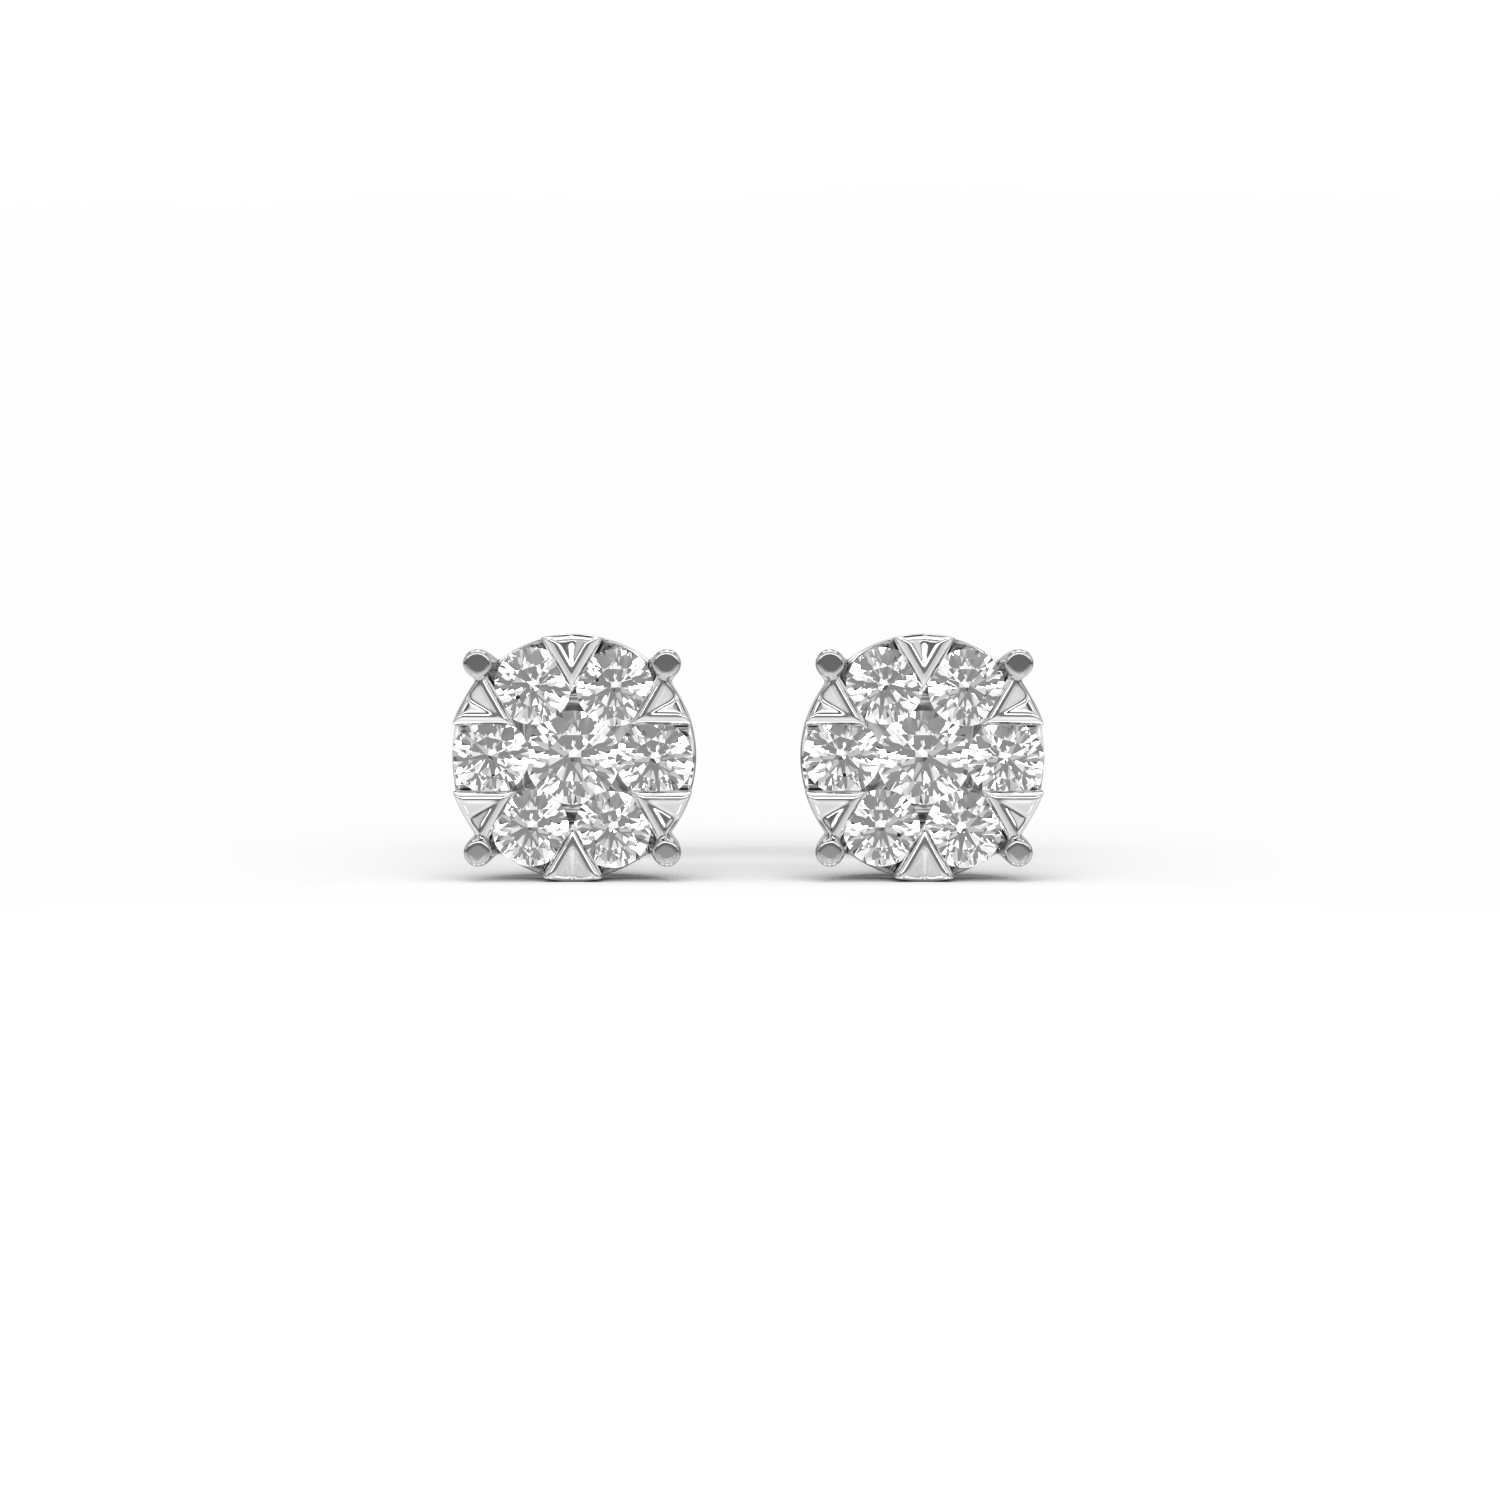 White gold screw back earrings with 0.5ct diamonds